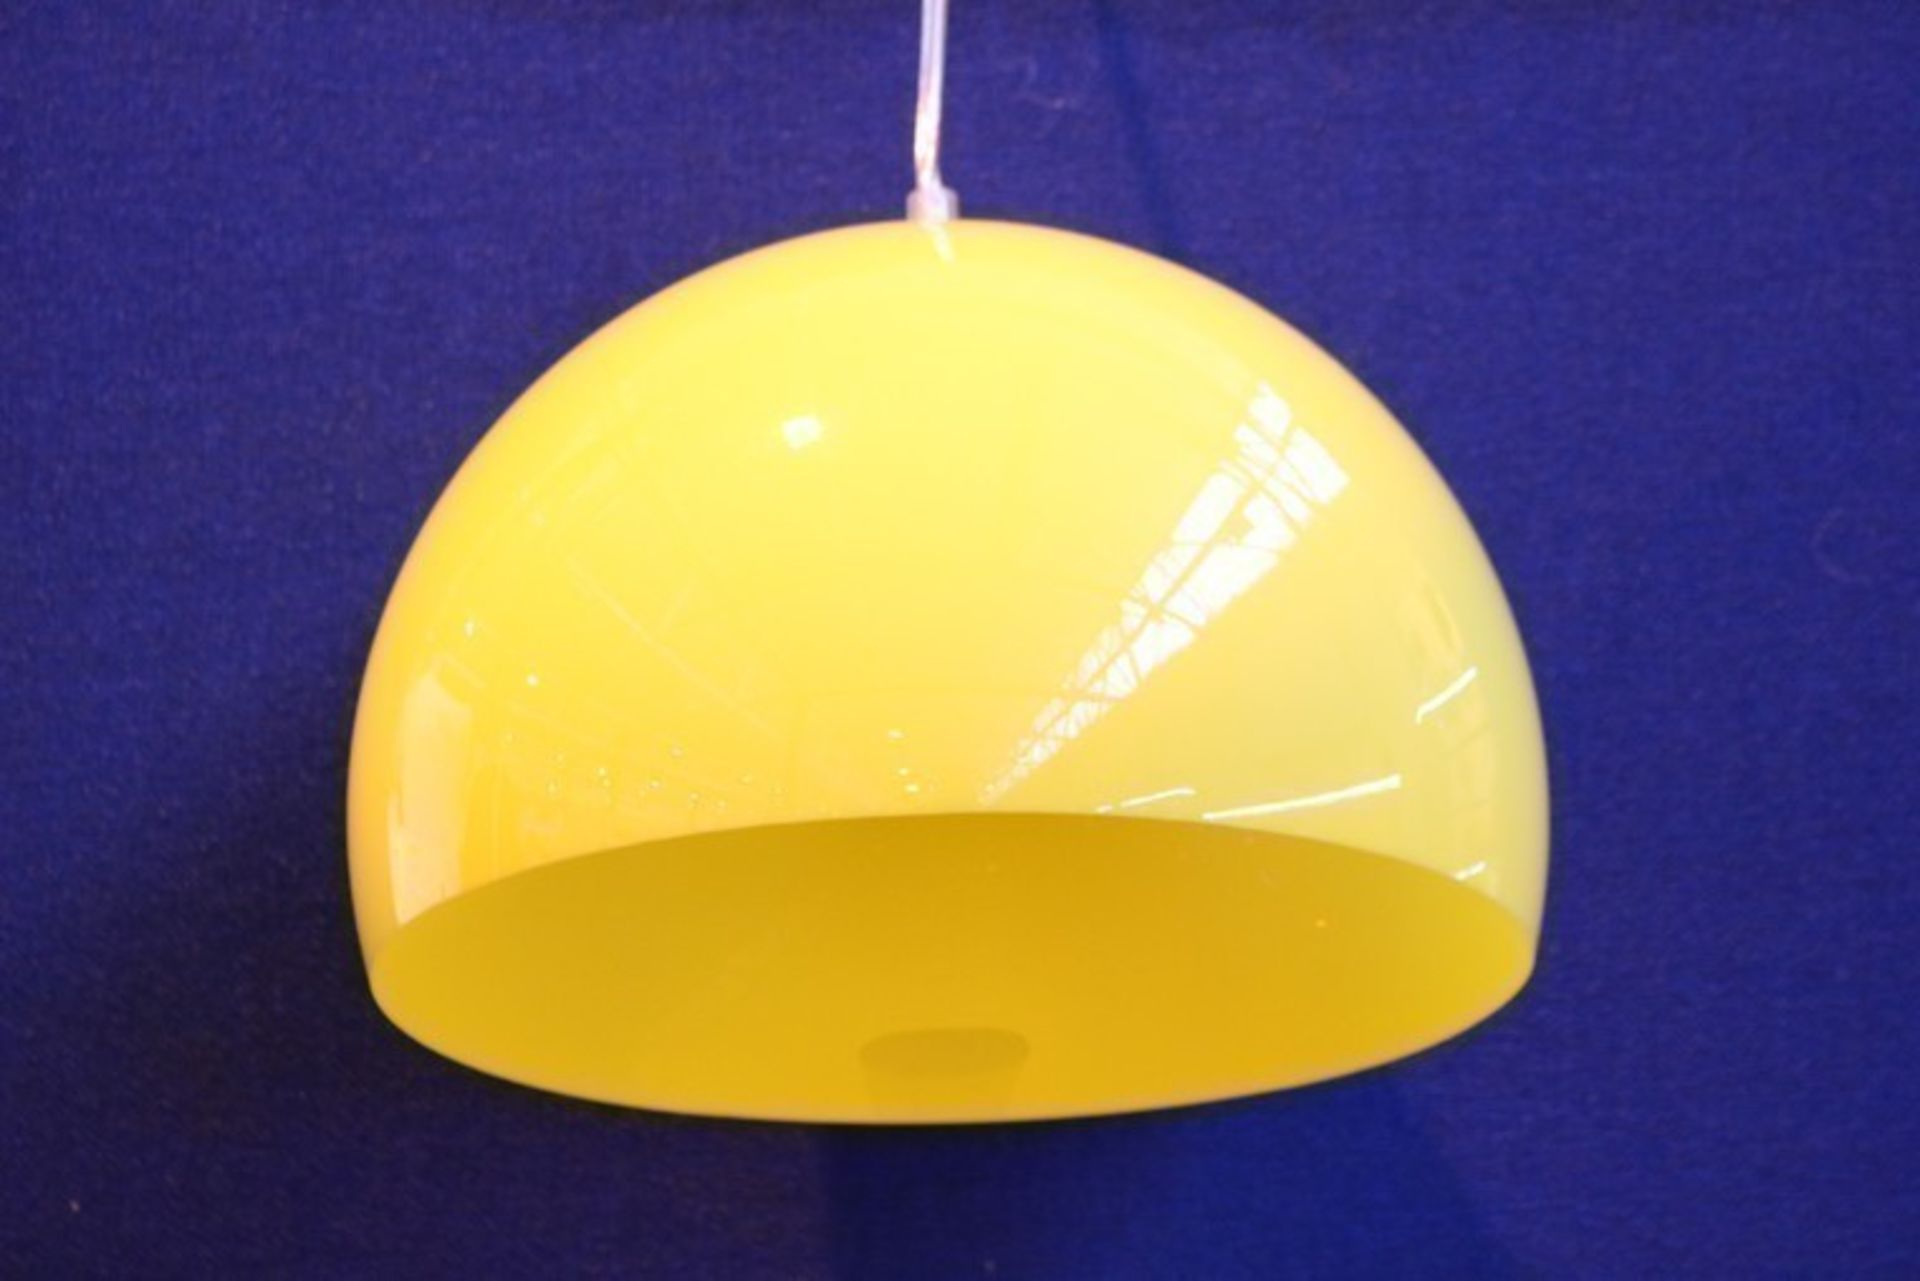 1 x BOXED BRAND NEW AND SEALED FLY ROMAN CONRAD COLLECTION SMALL CEILING LIGHT FITTING IN YELLOW (